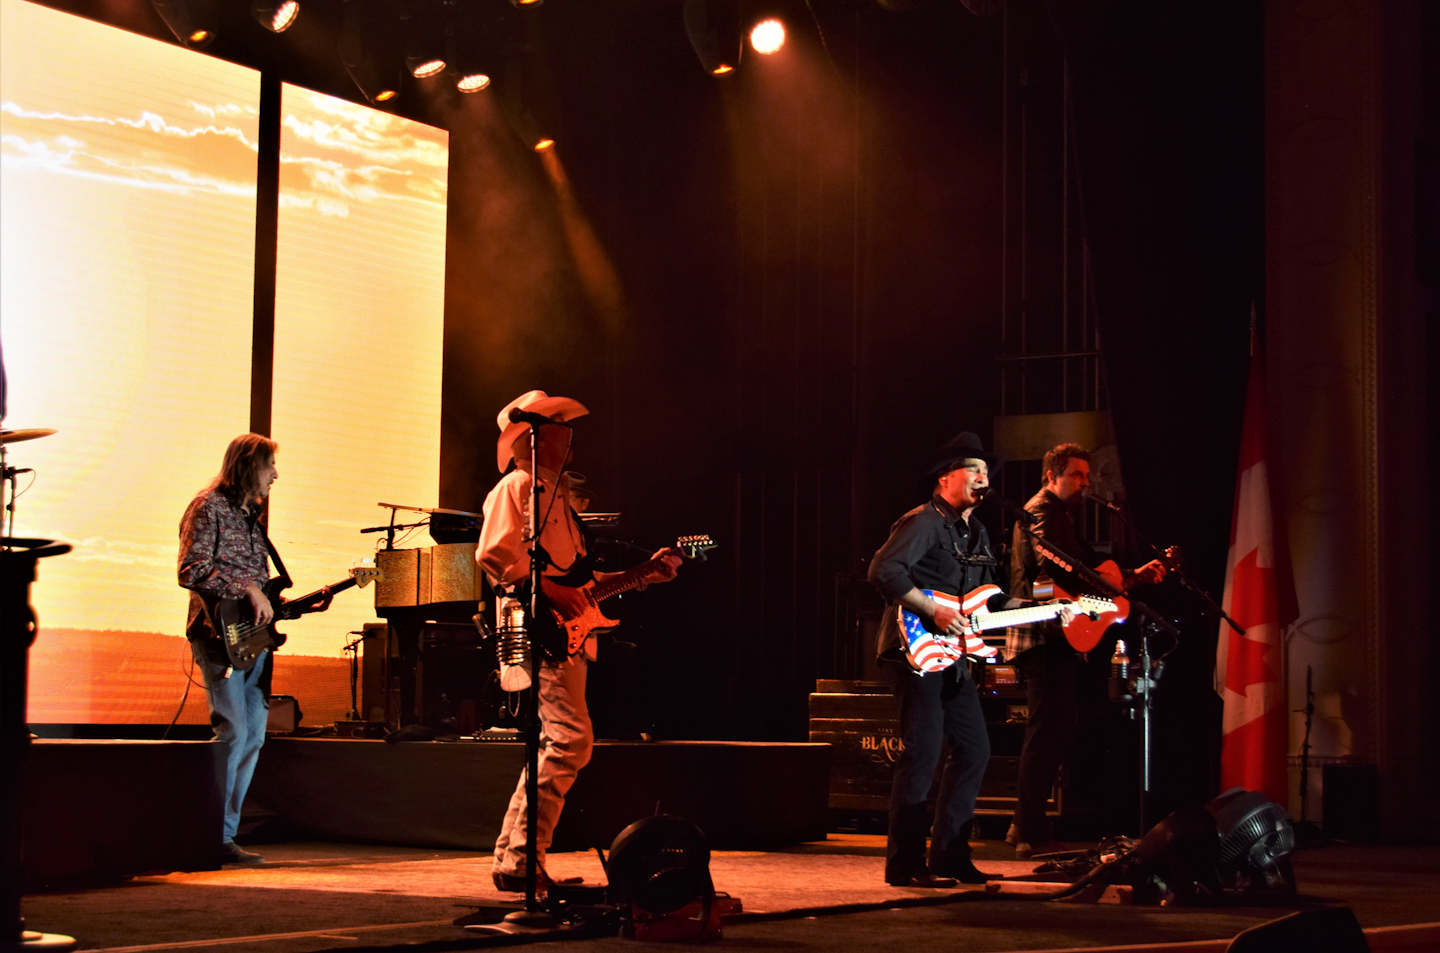 clint black and band on stage